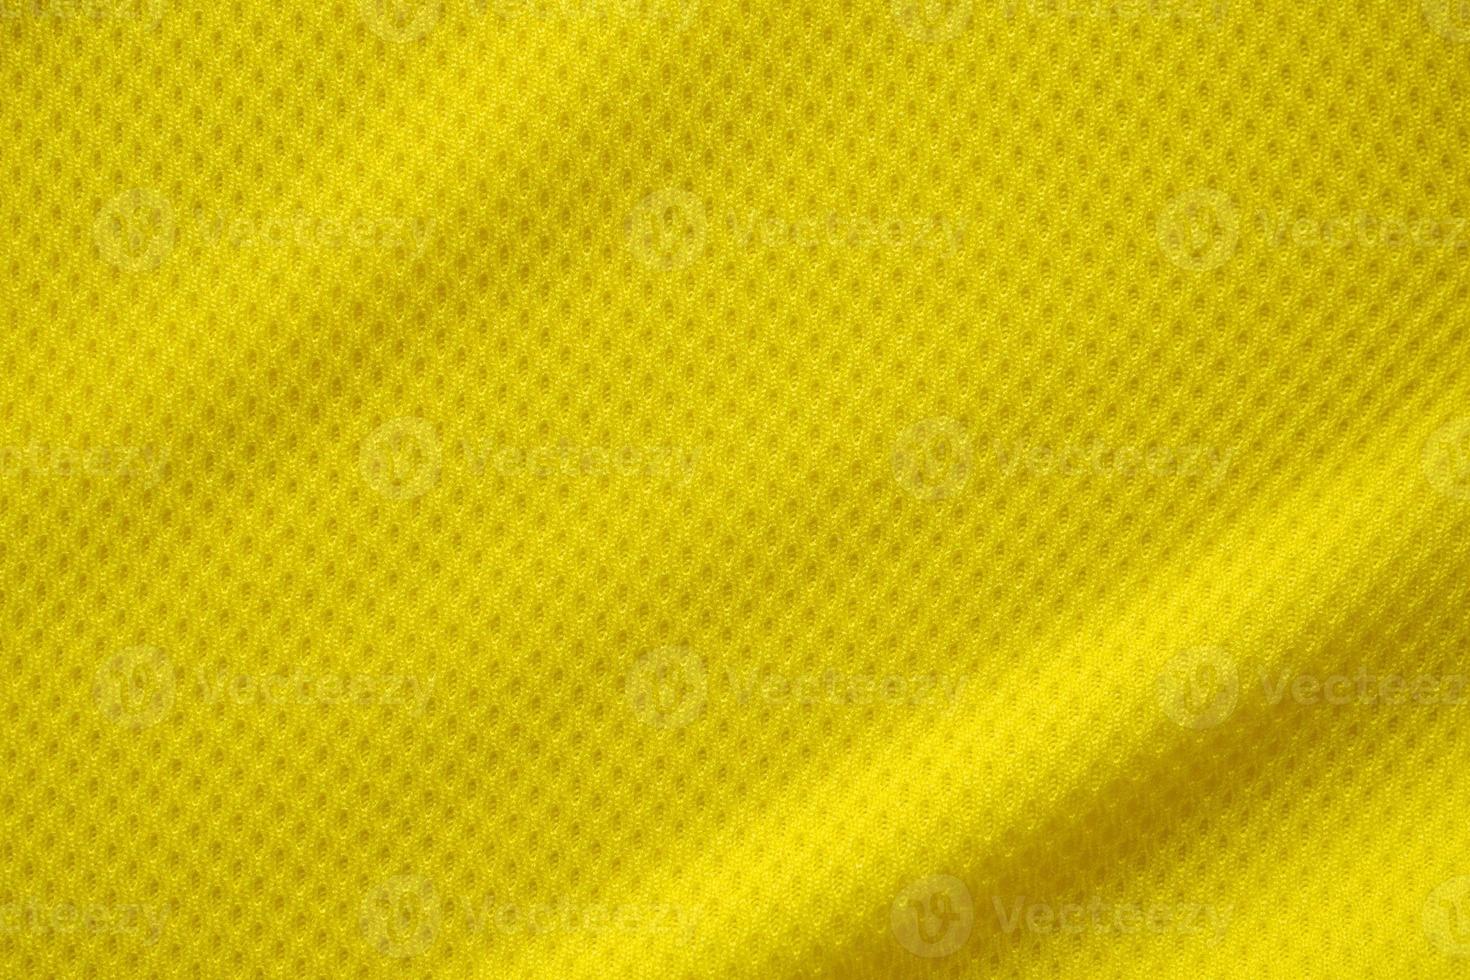 Yellow color football jersey clothing fabric texture sports wear background, close up photo